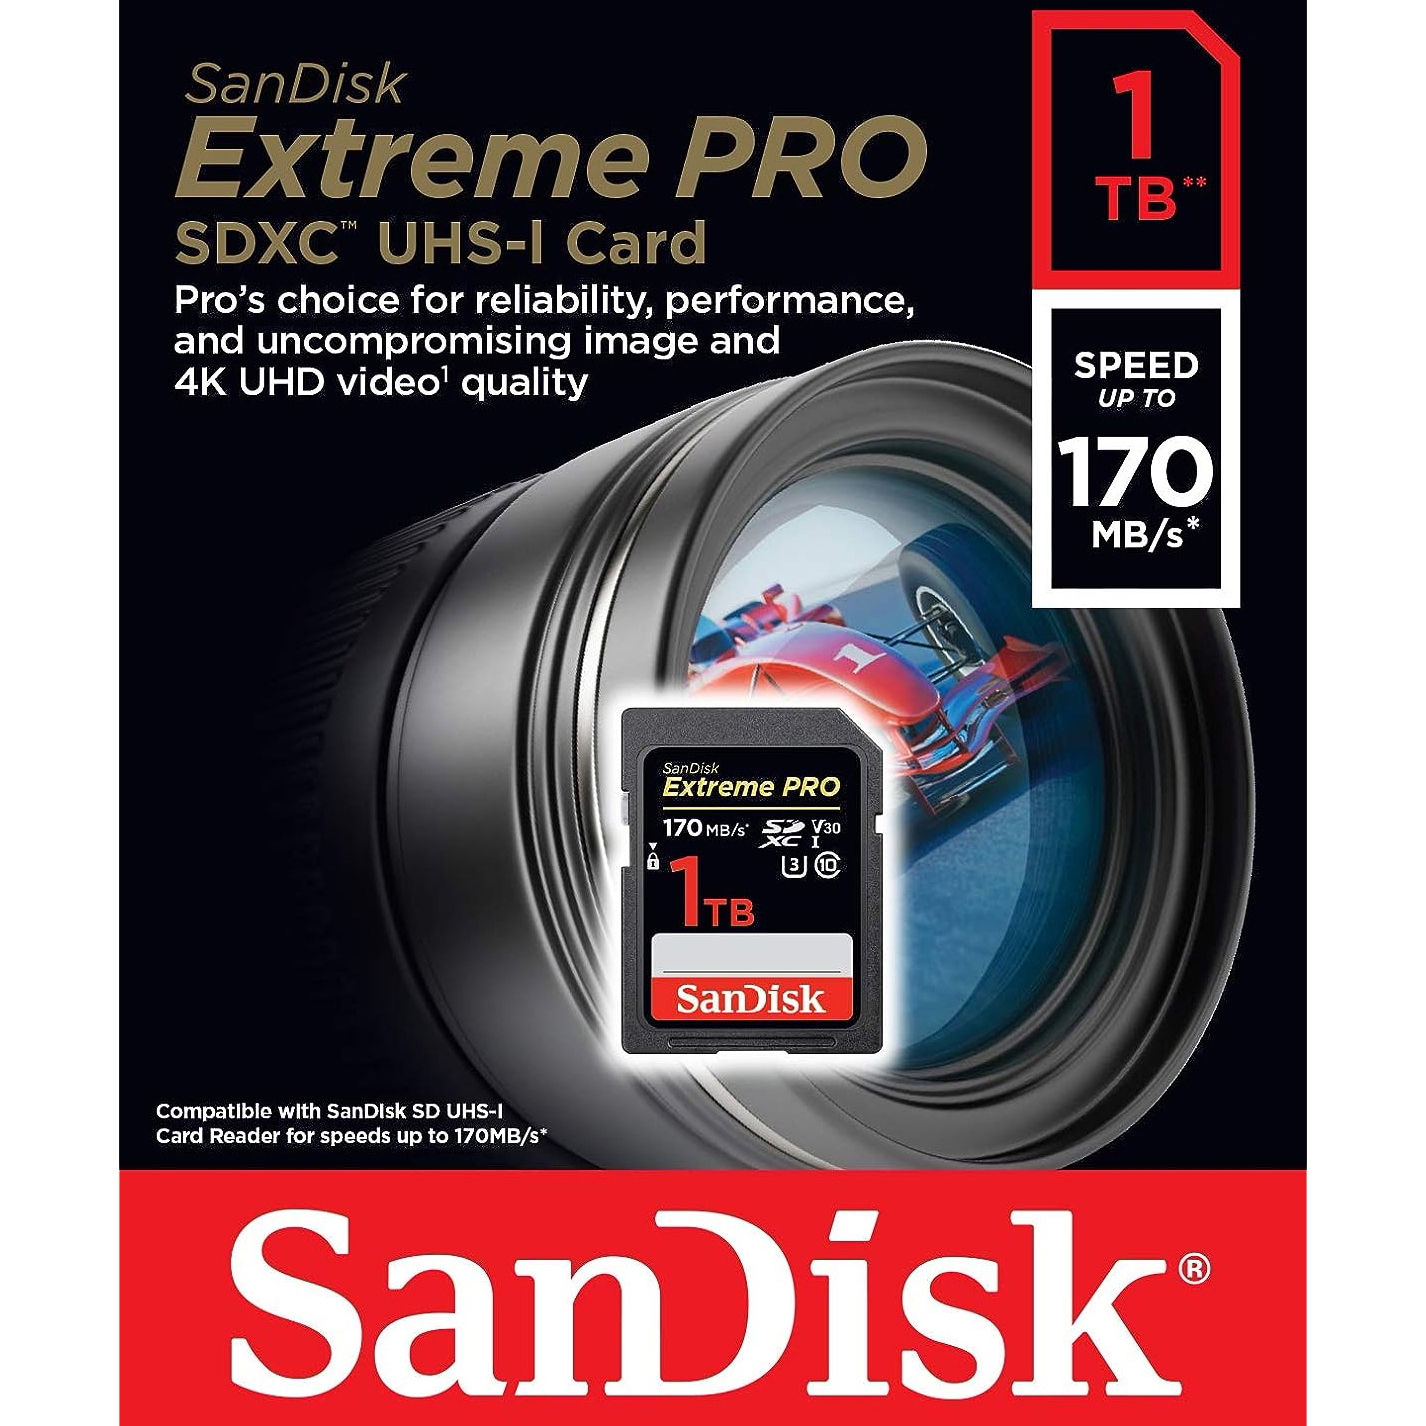 Original Sandisk Extreme Pro 1Tb Uhs-I Class 10 Memory Card (SDSDXXD-1T00-GN4IN)